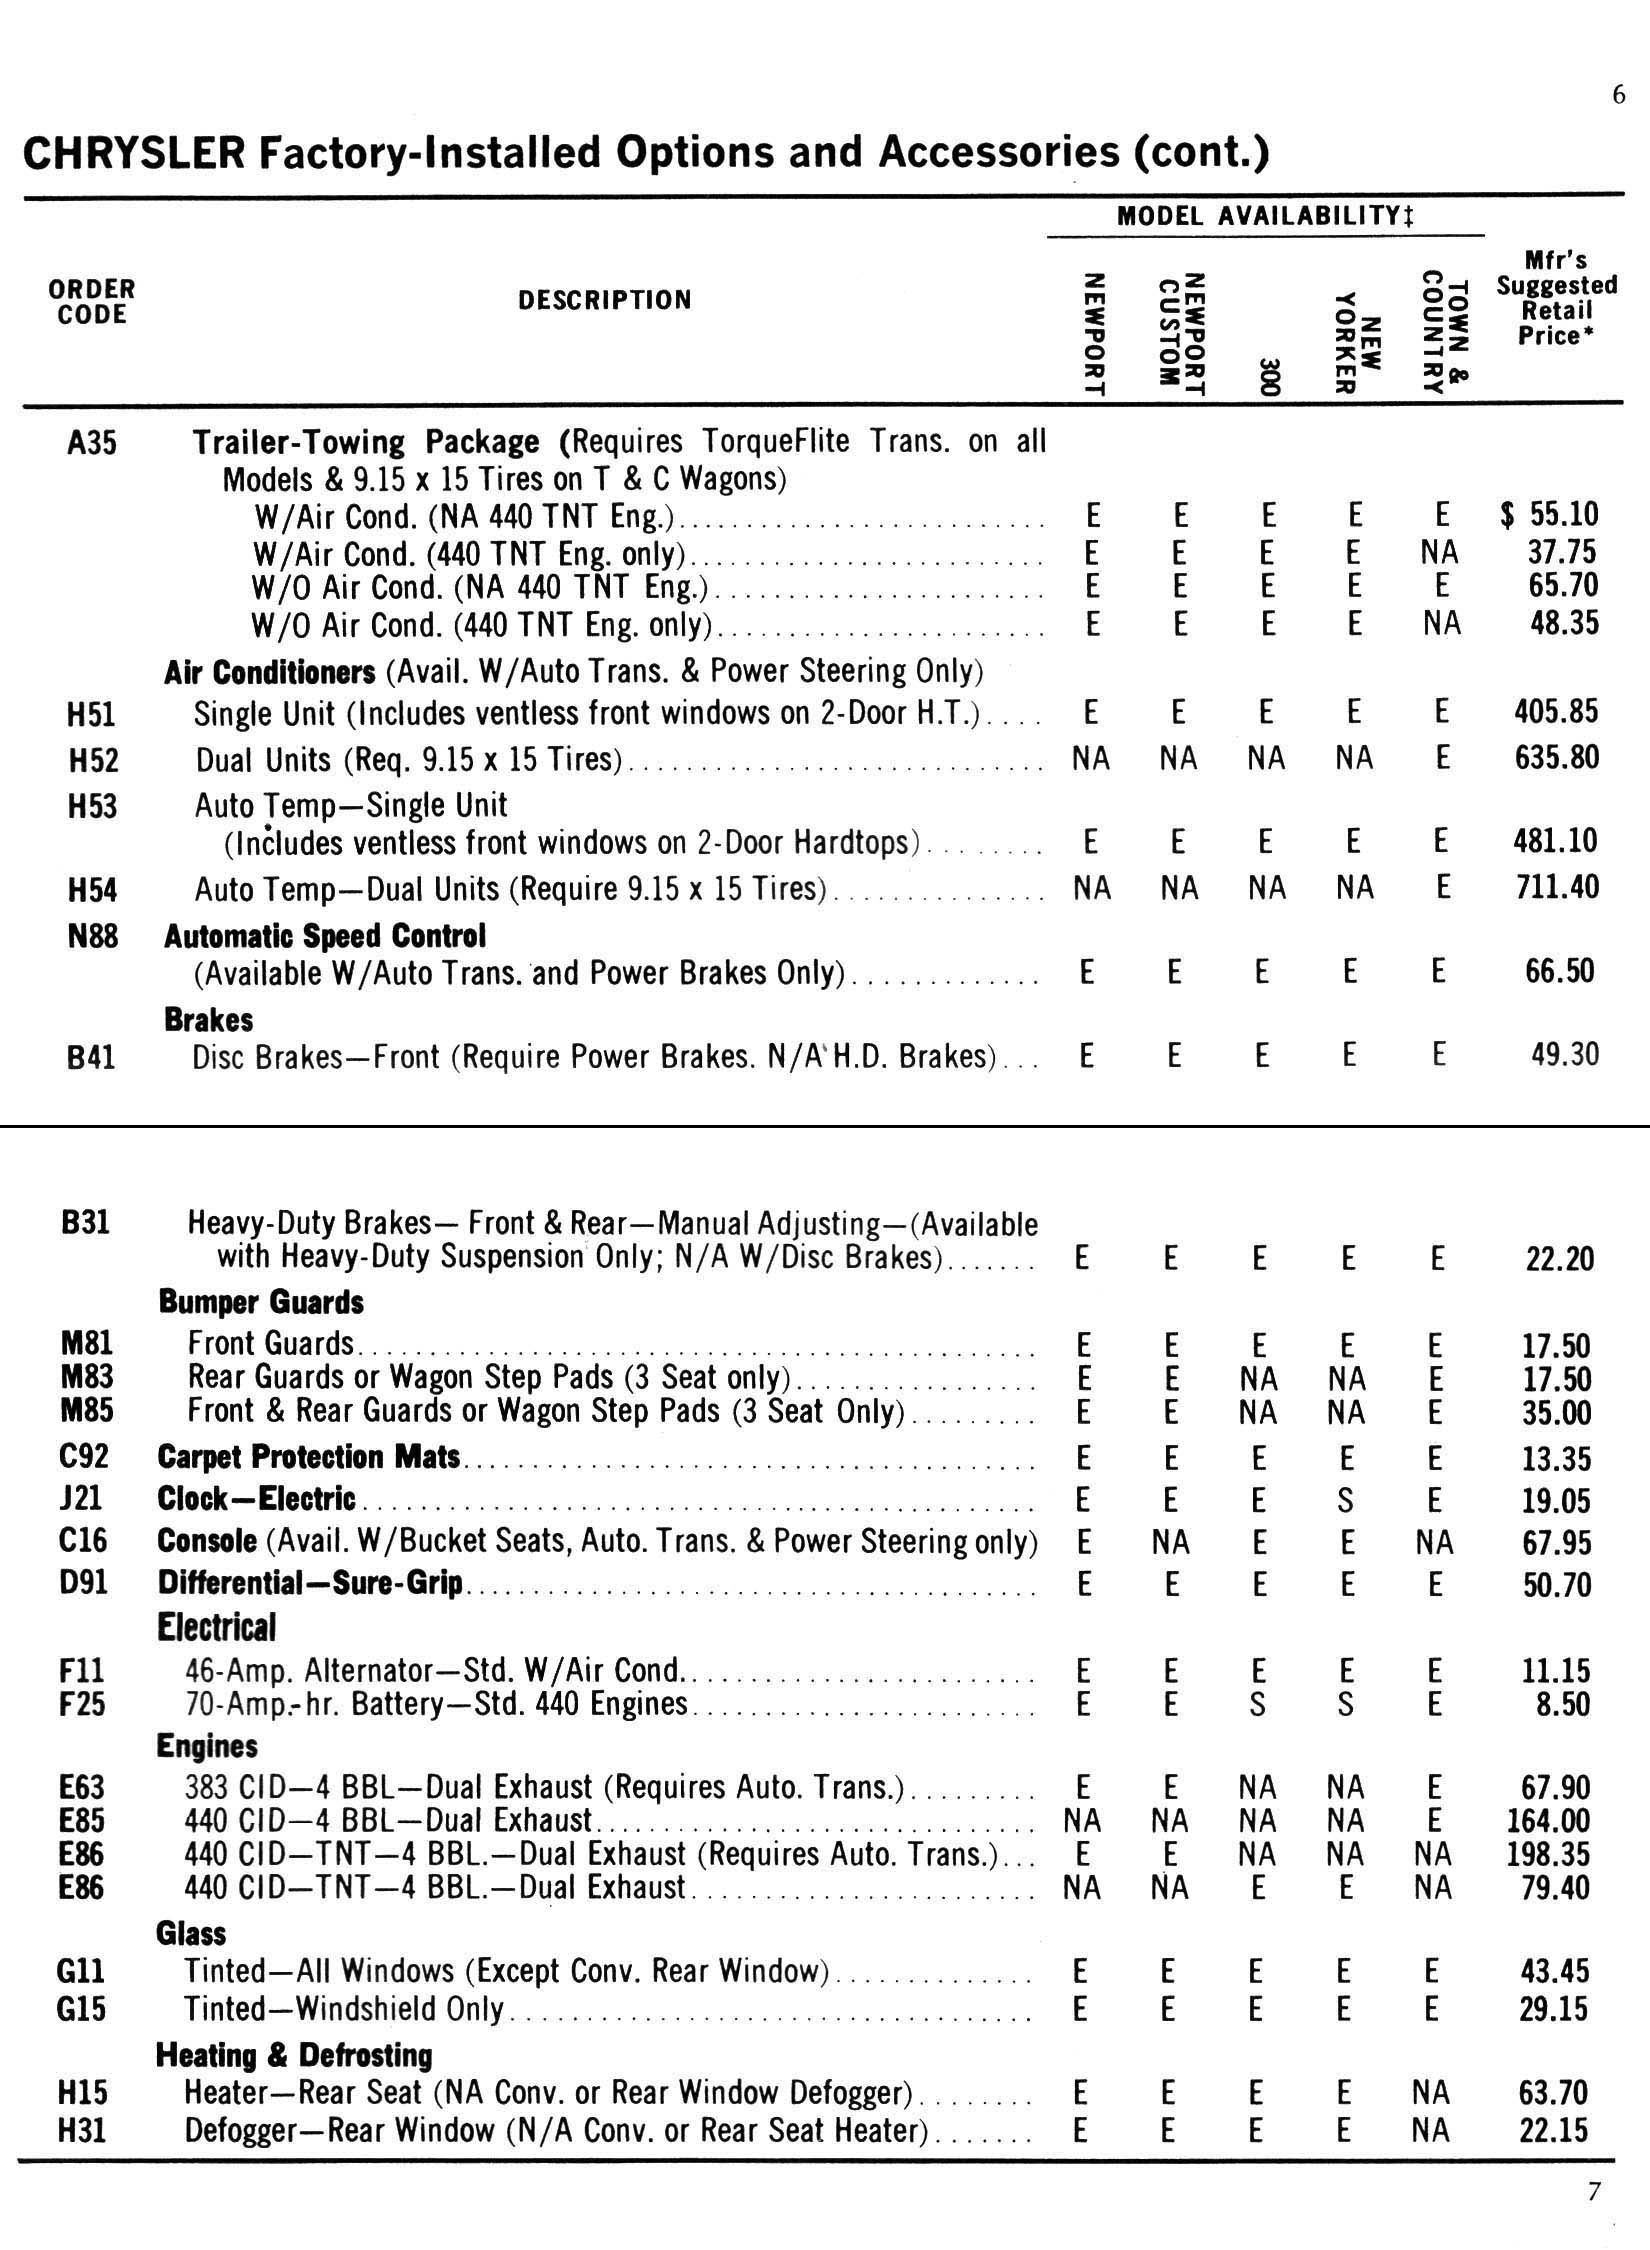 1969 Chrysler Car And Equipment Price List Page 10